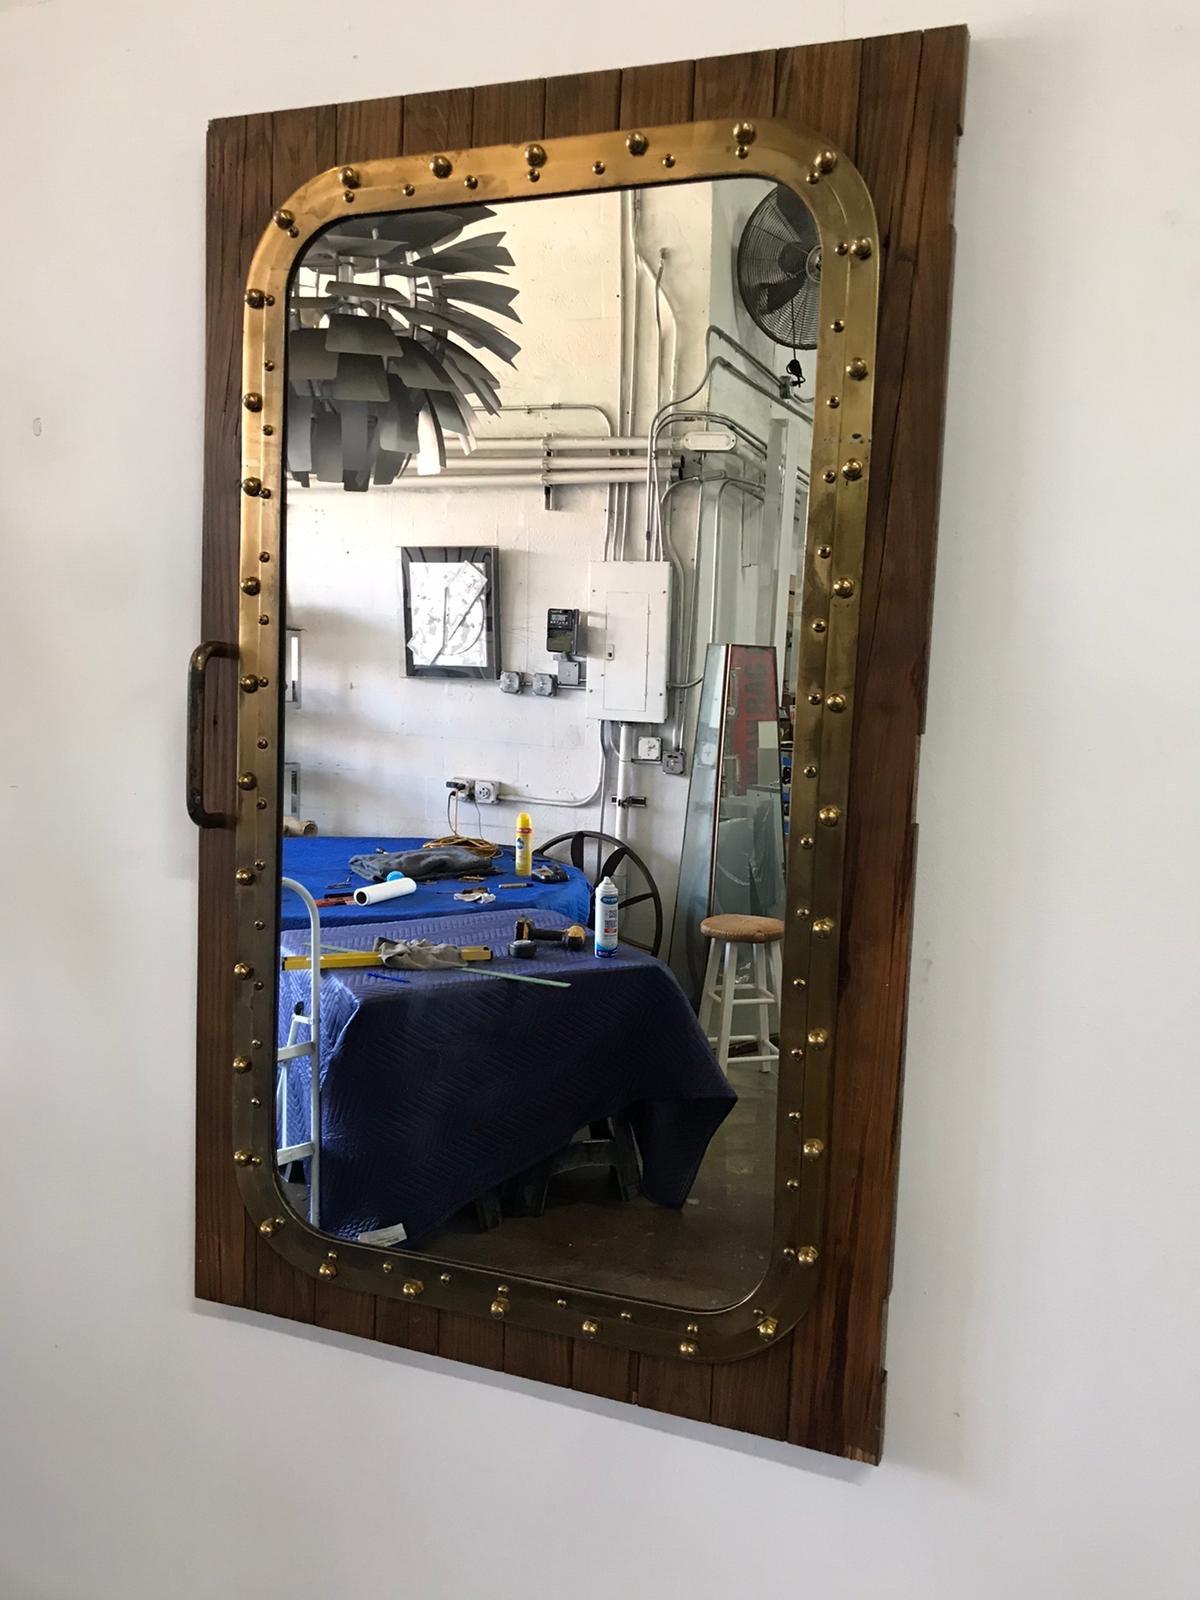 One of two, almost identical windows repurposed into mirrors, this pair of bronze and oak architectural remnants rescued from a shipyard on the Miami River. Antique and very large with original oak wood patina. We removed the hinges but left the